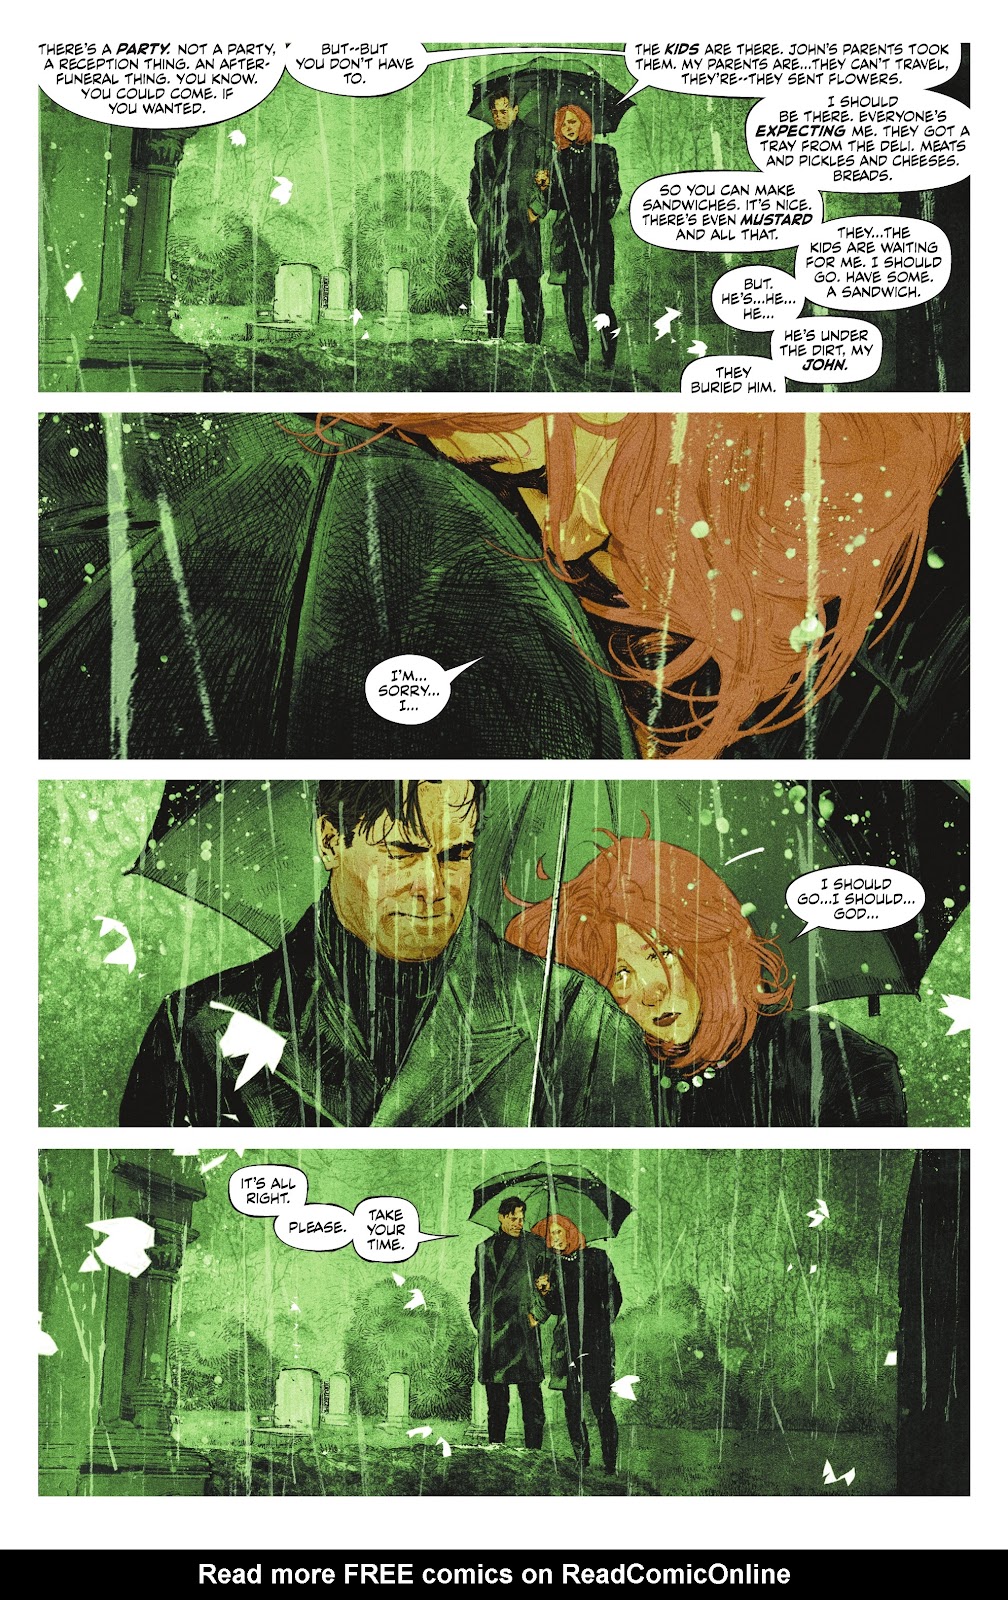 Batman: One Bad Day - The Riddler issue 1 - Page 16